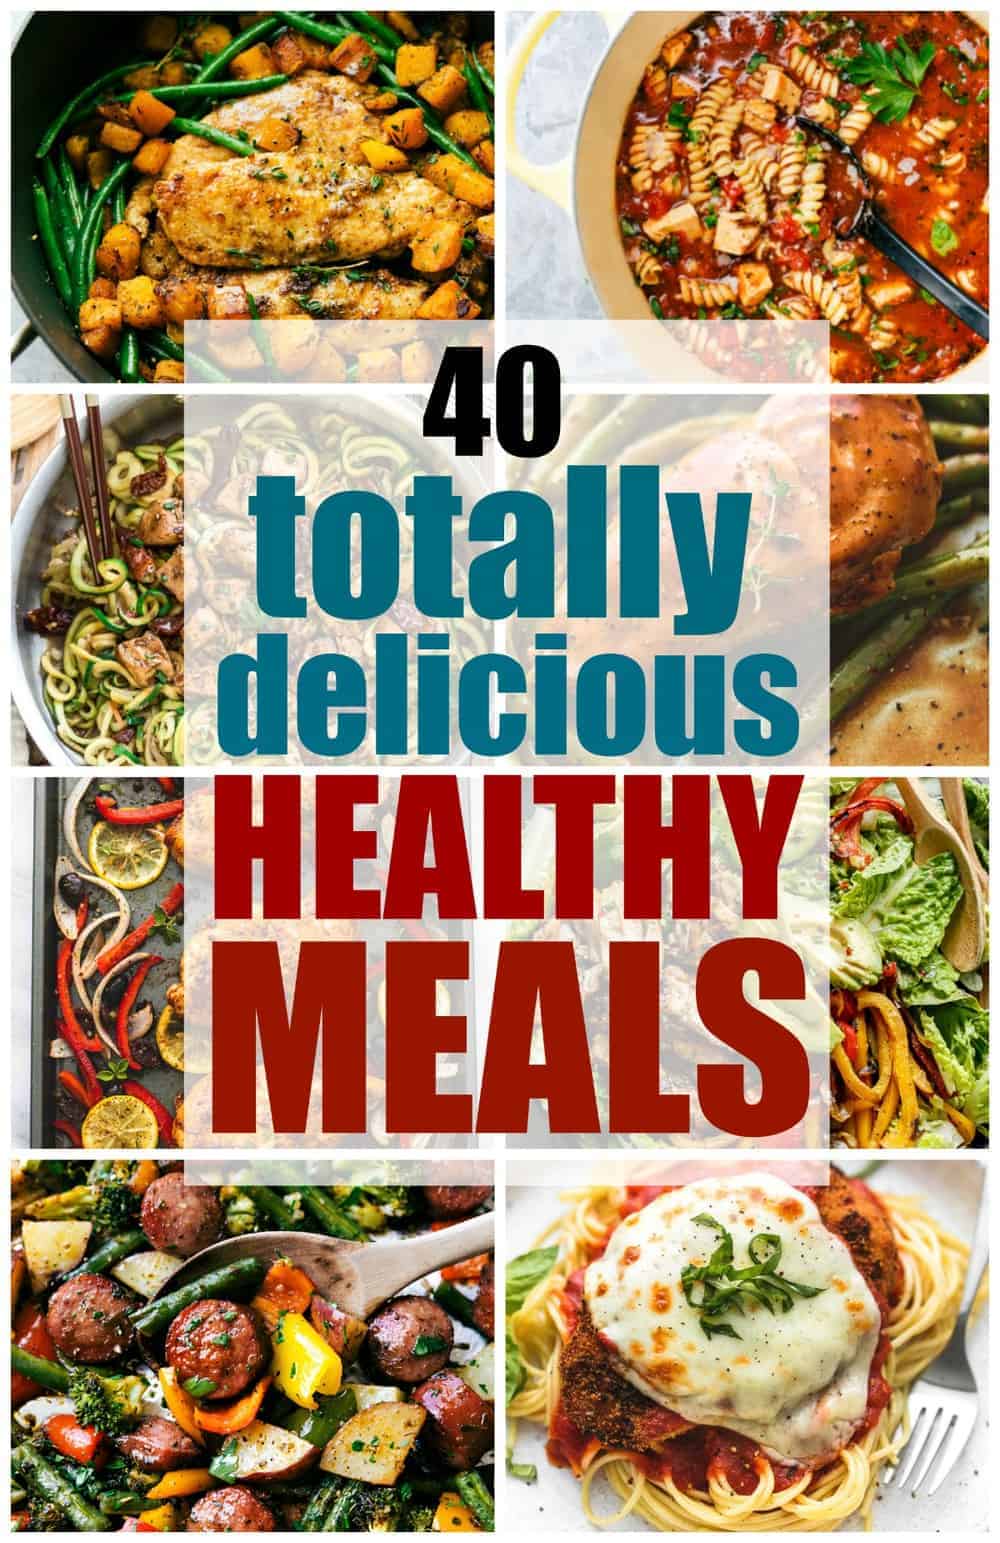 40 Totally Delicious Healthy Meals | The Recipe Critic